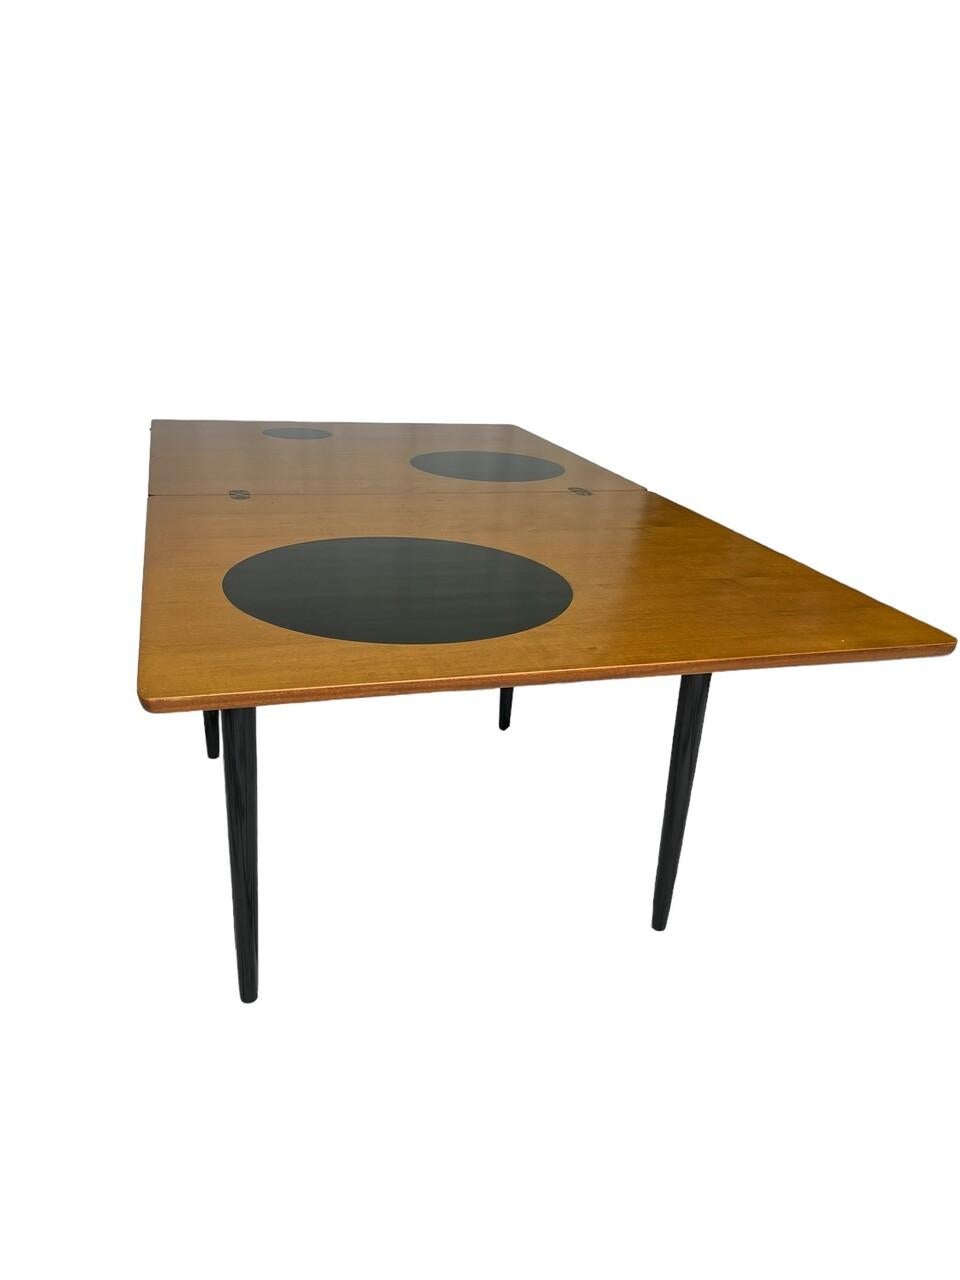 Indulge in mid-century charm with the Danish Teak Flip Top Game Table inspired by Grete Jalk. Crafted with exquisite teak wood, its sleek design boasts whimsical circle accents, adding a touch of playfulness to your space. The flip-top feature